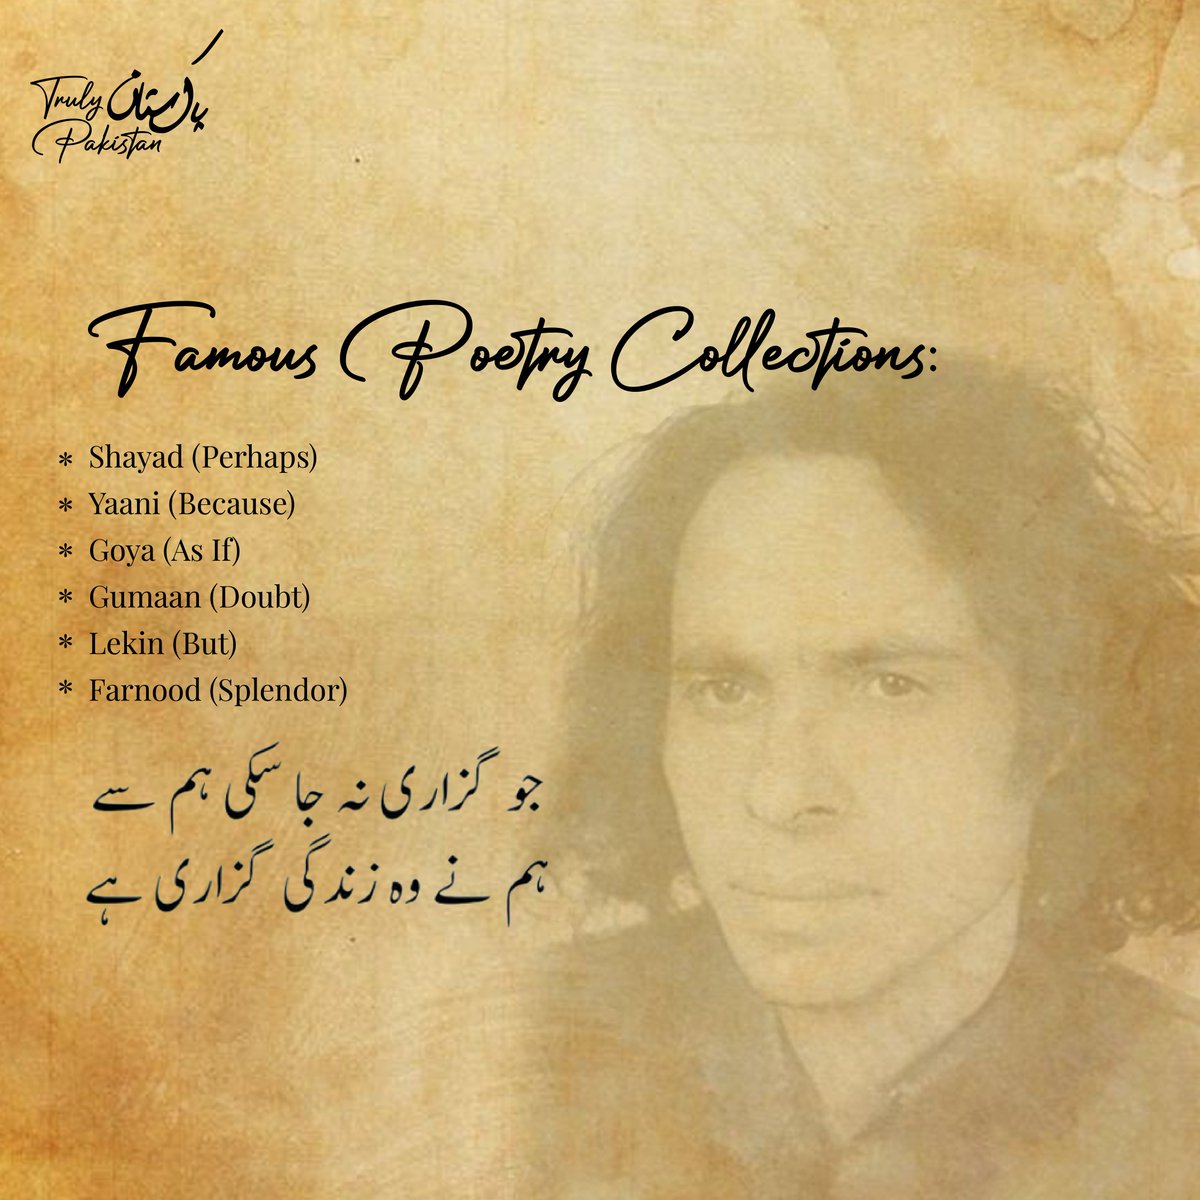 Jaun Elia's poetry speaks to the depths of the human experience, offering a glimpse into the complexities of life and love. 

#TrulyPakistan #PoeticWisdom #JaunElia #Poetry #Depth #HumanExperience #Complexities #Life #Love